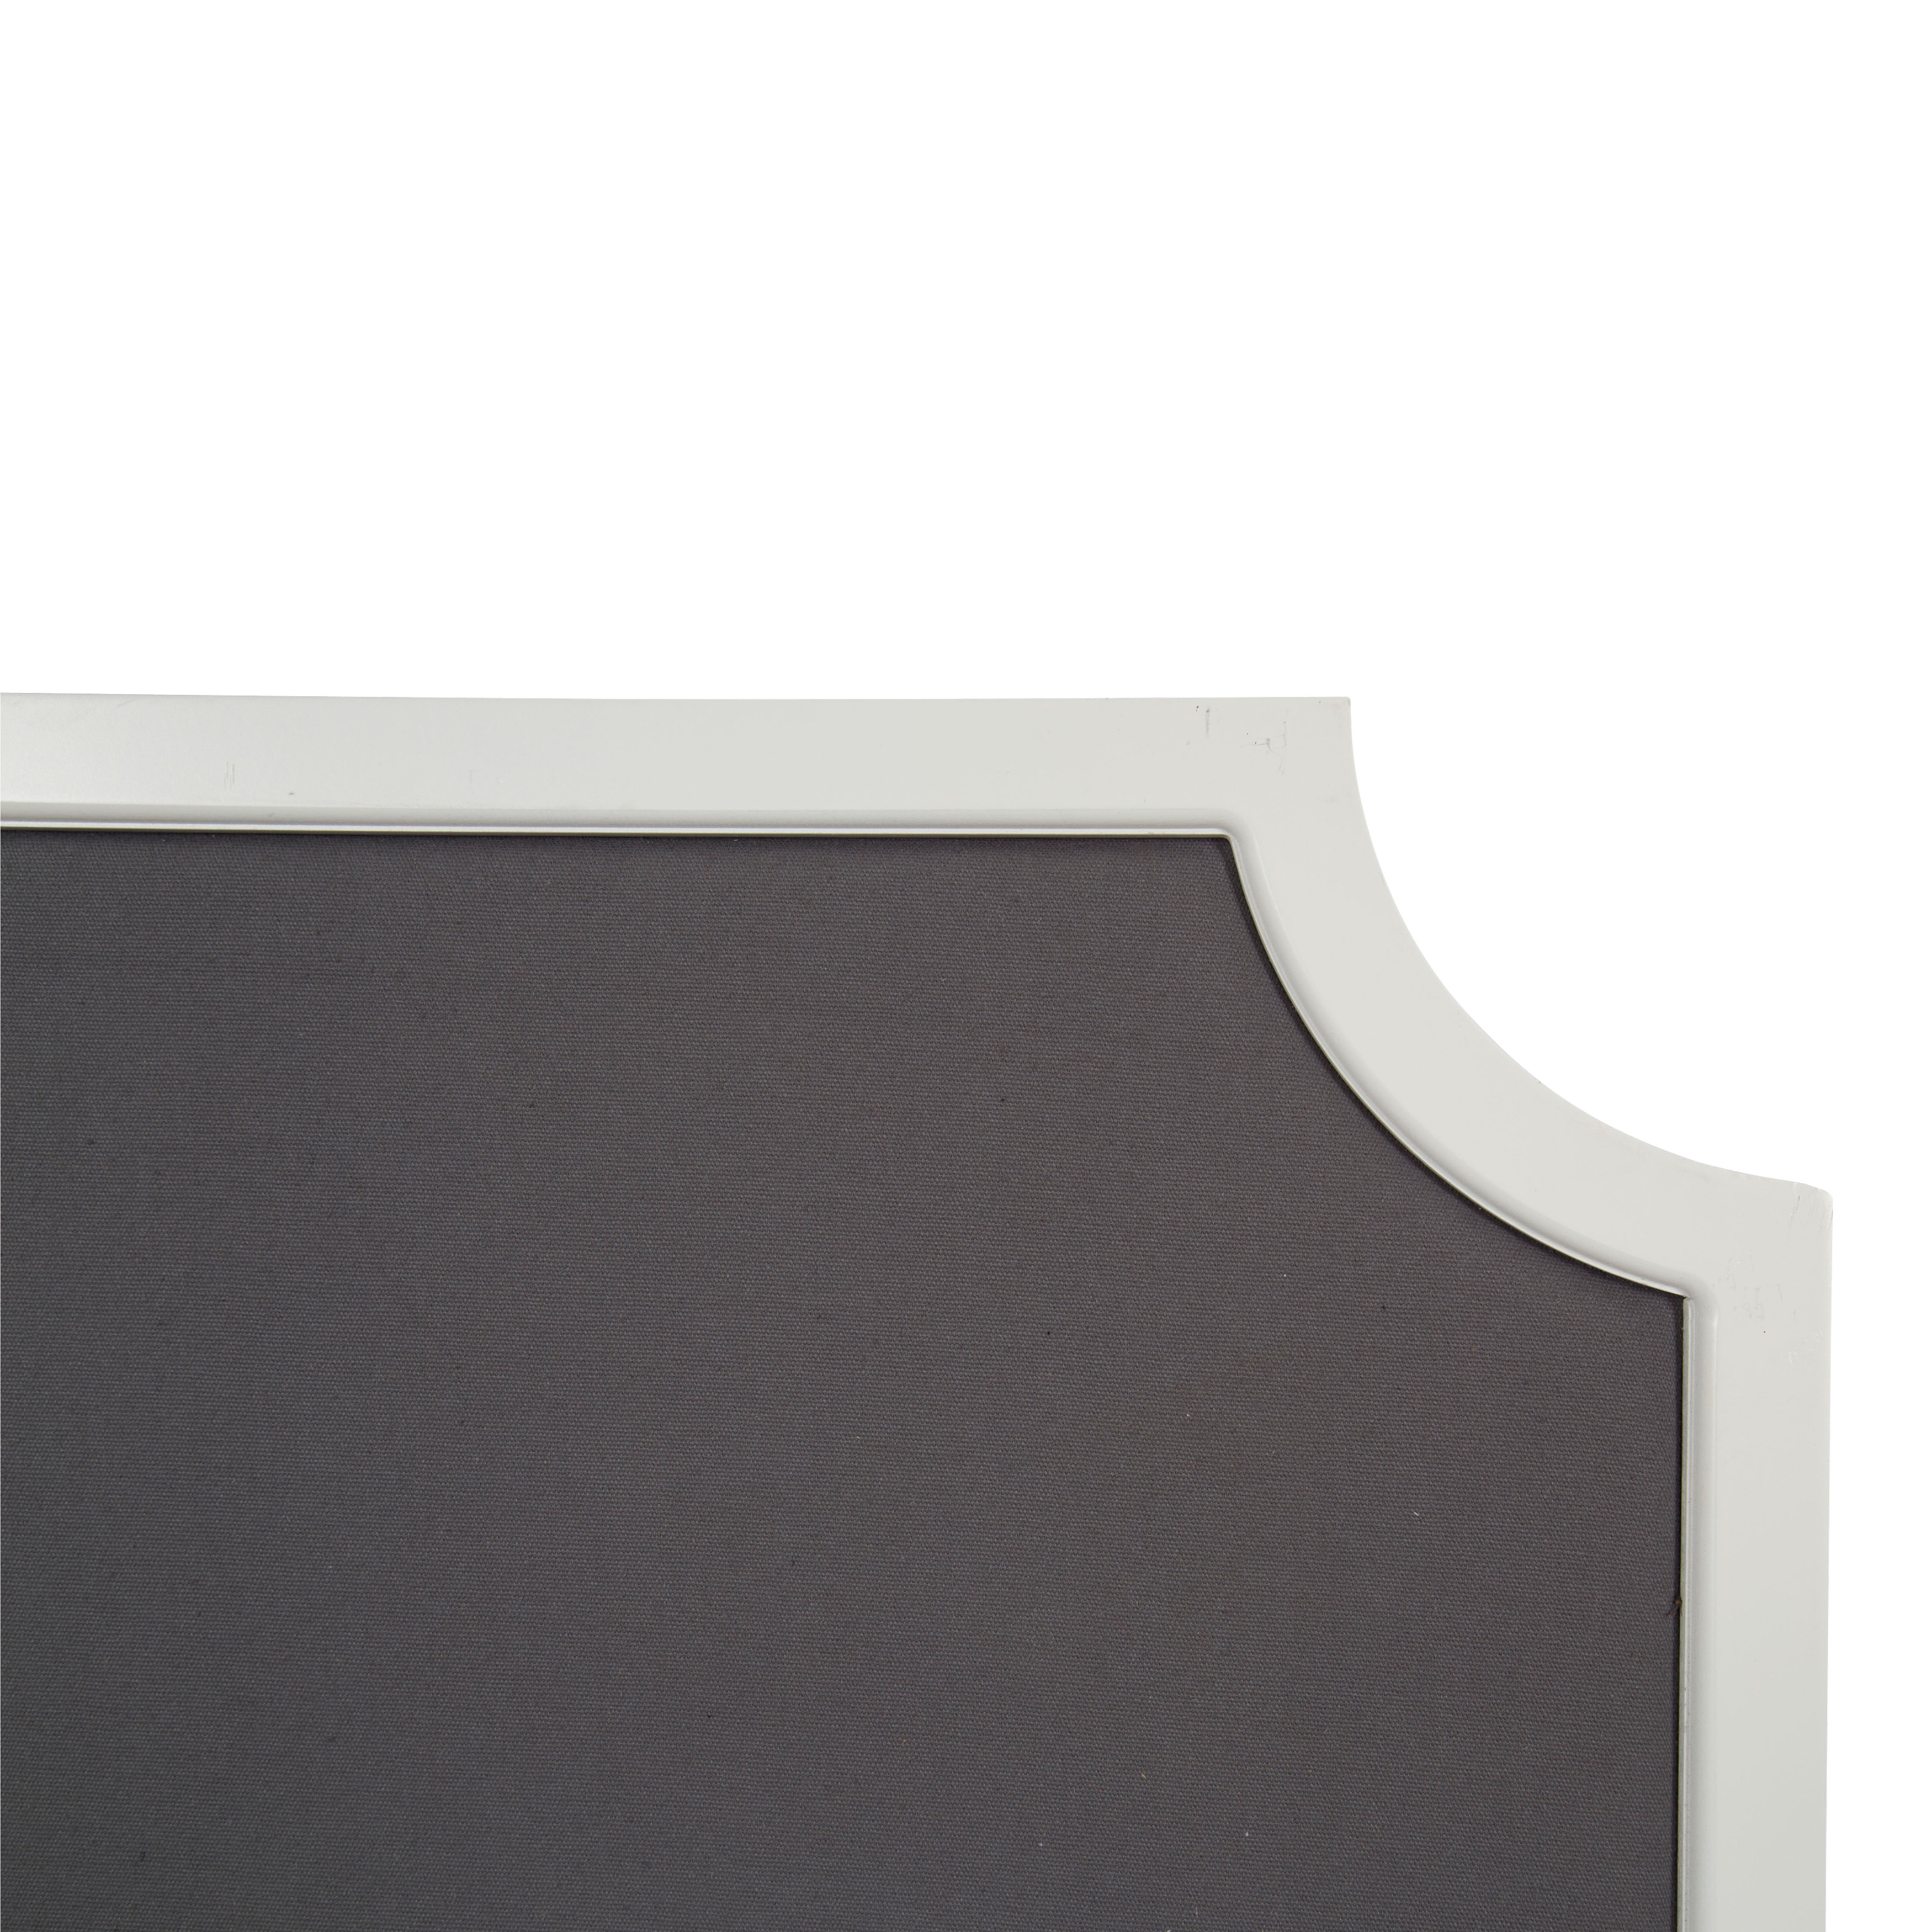 Kate and Laurel Hogan Wood Framed Fabric Pinboard with Scallop Corners, 24  x 36 Inches, White and Gray